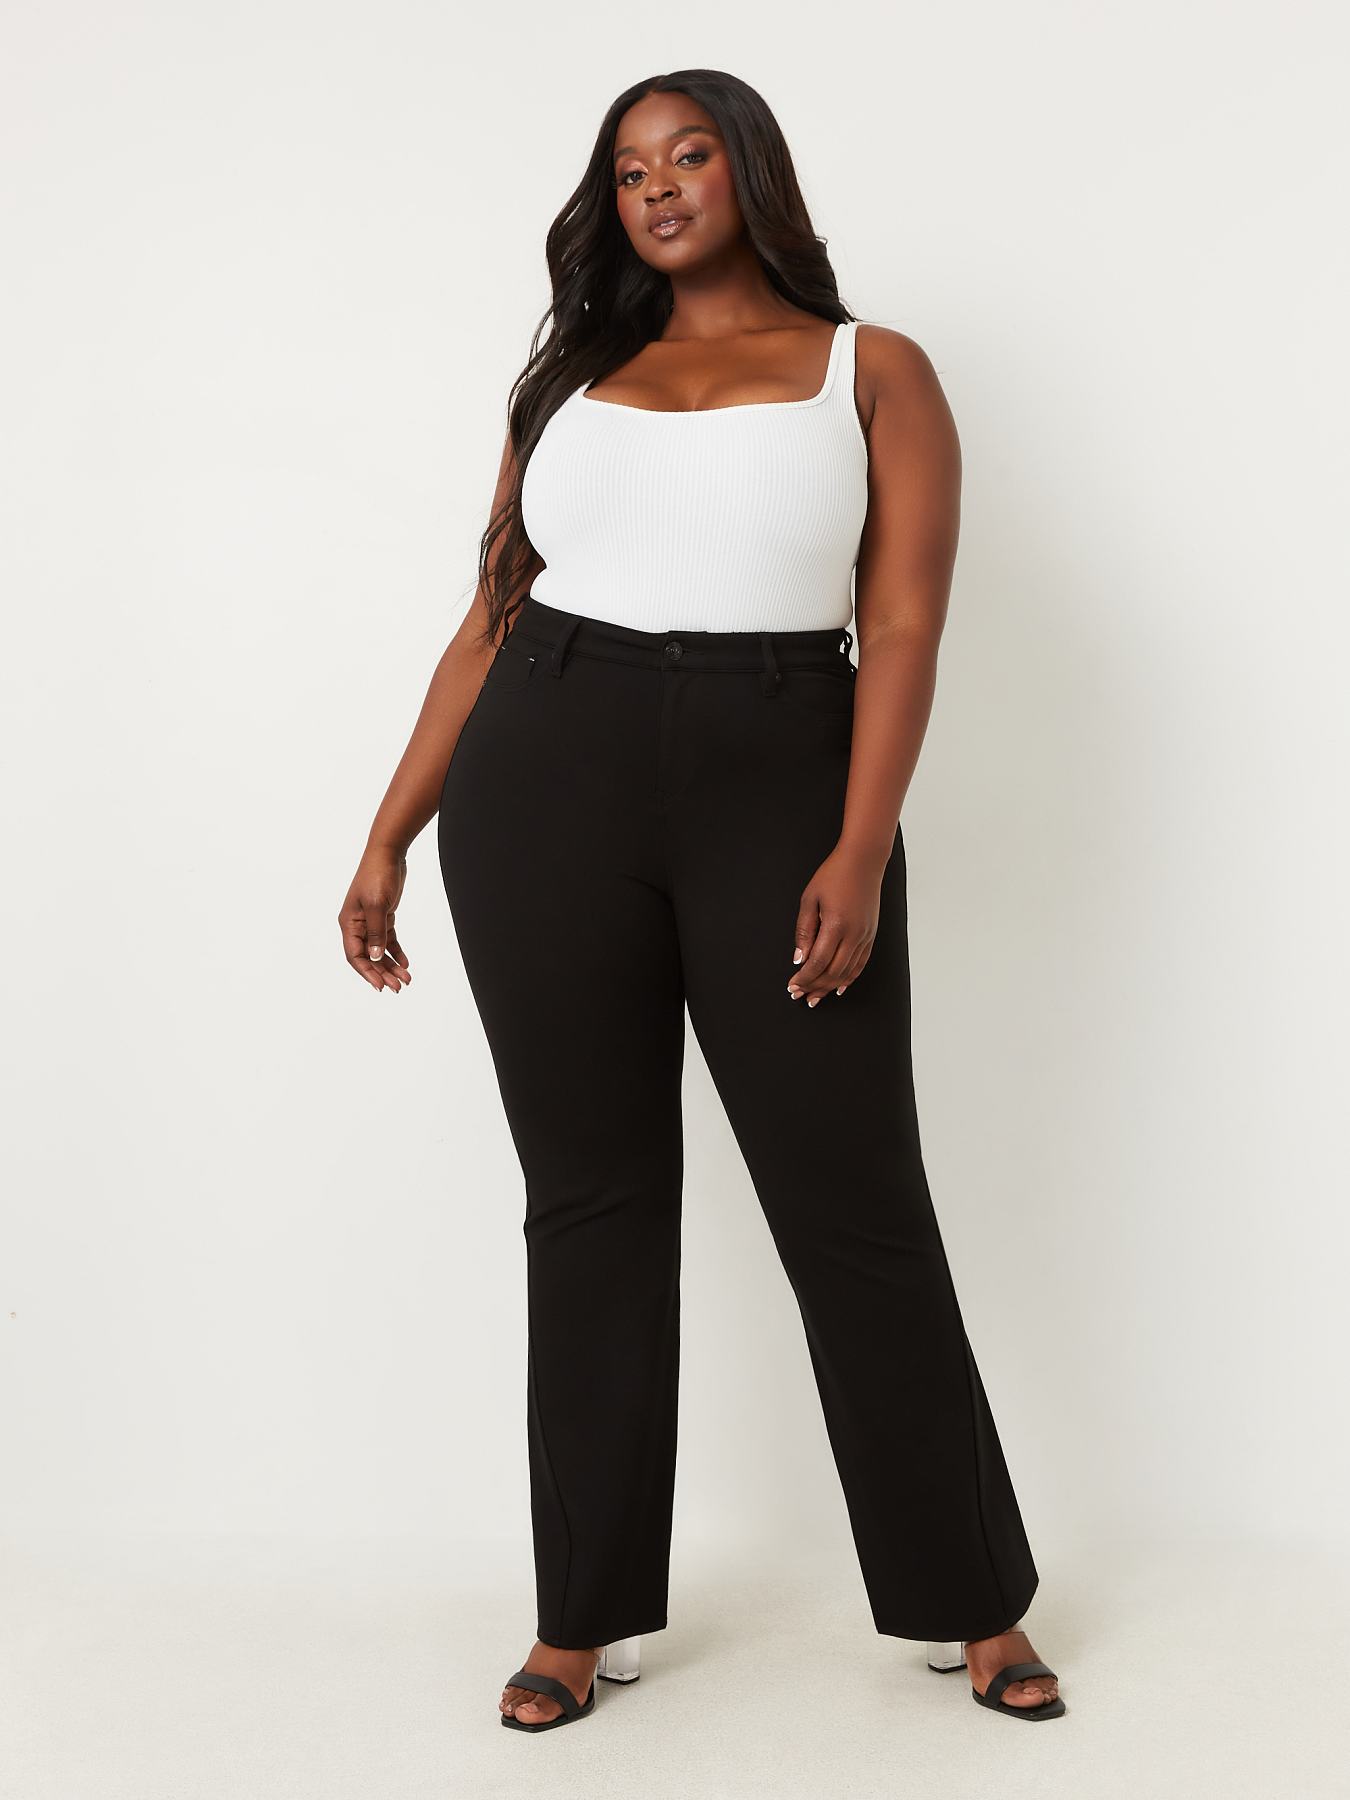 Plus size distressed leggings  Plus size baddie outfits, Curvy